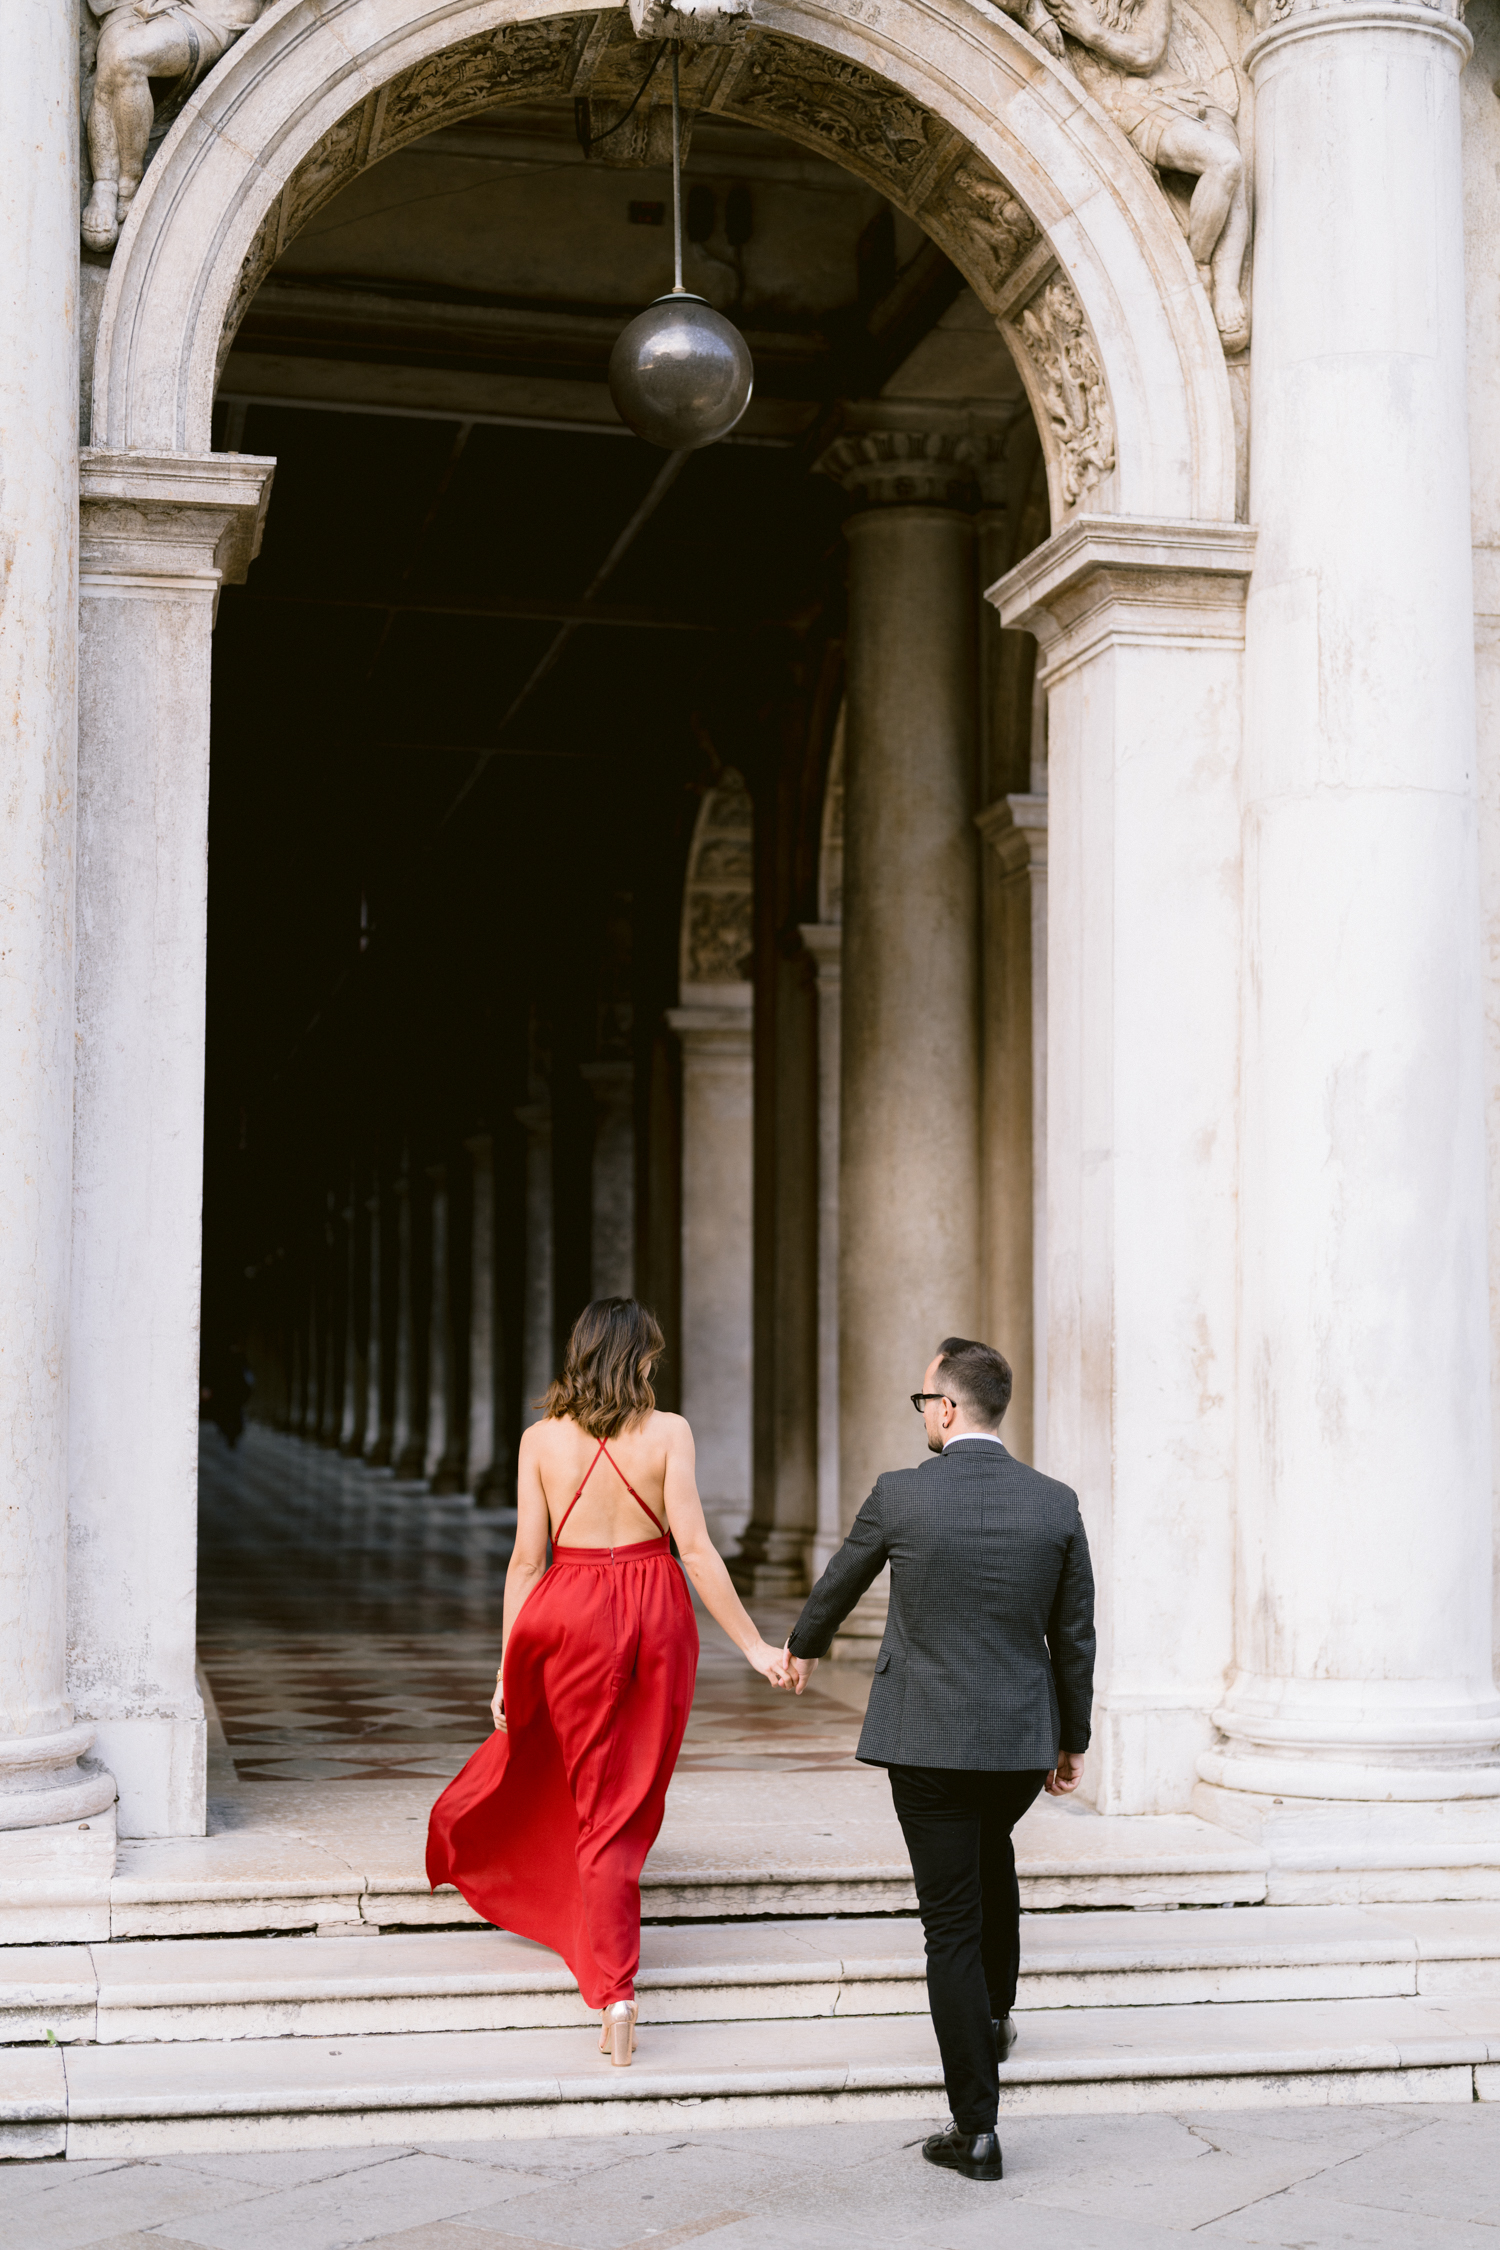 Book the best marriage proposal photographer in Venice